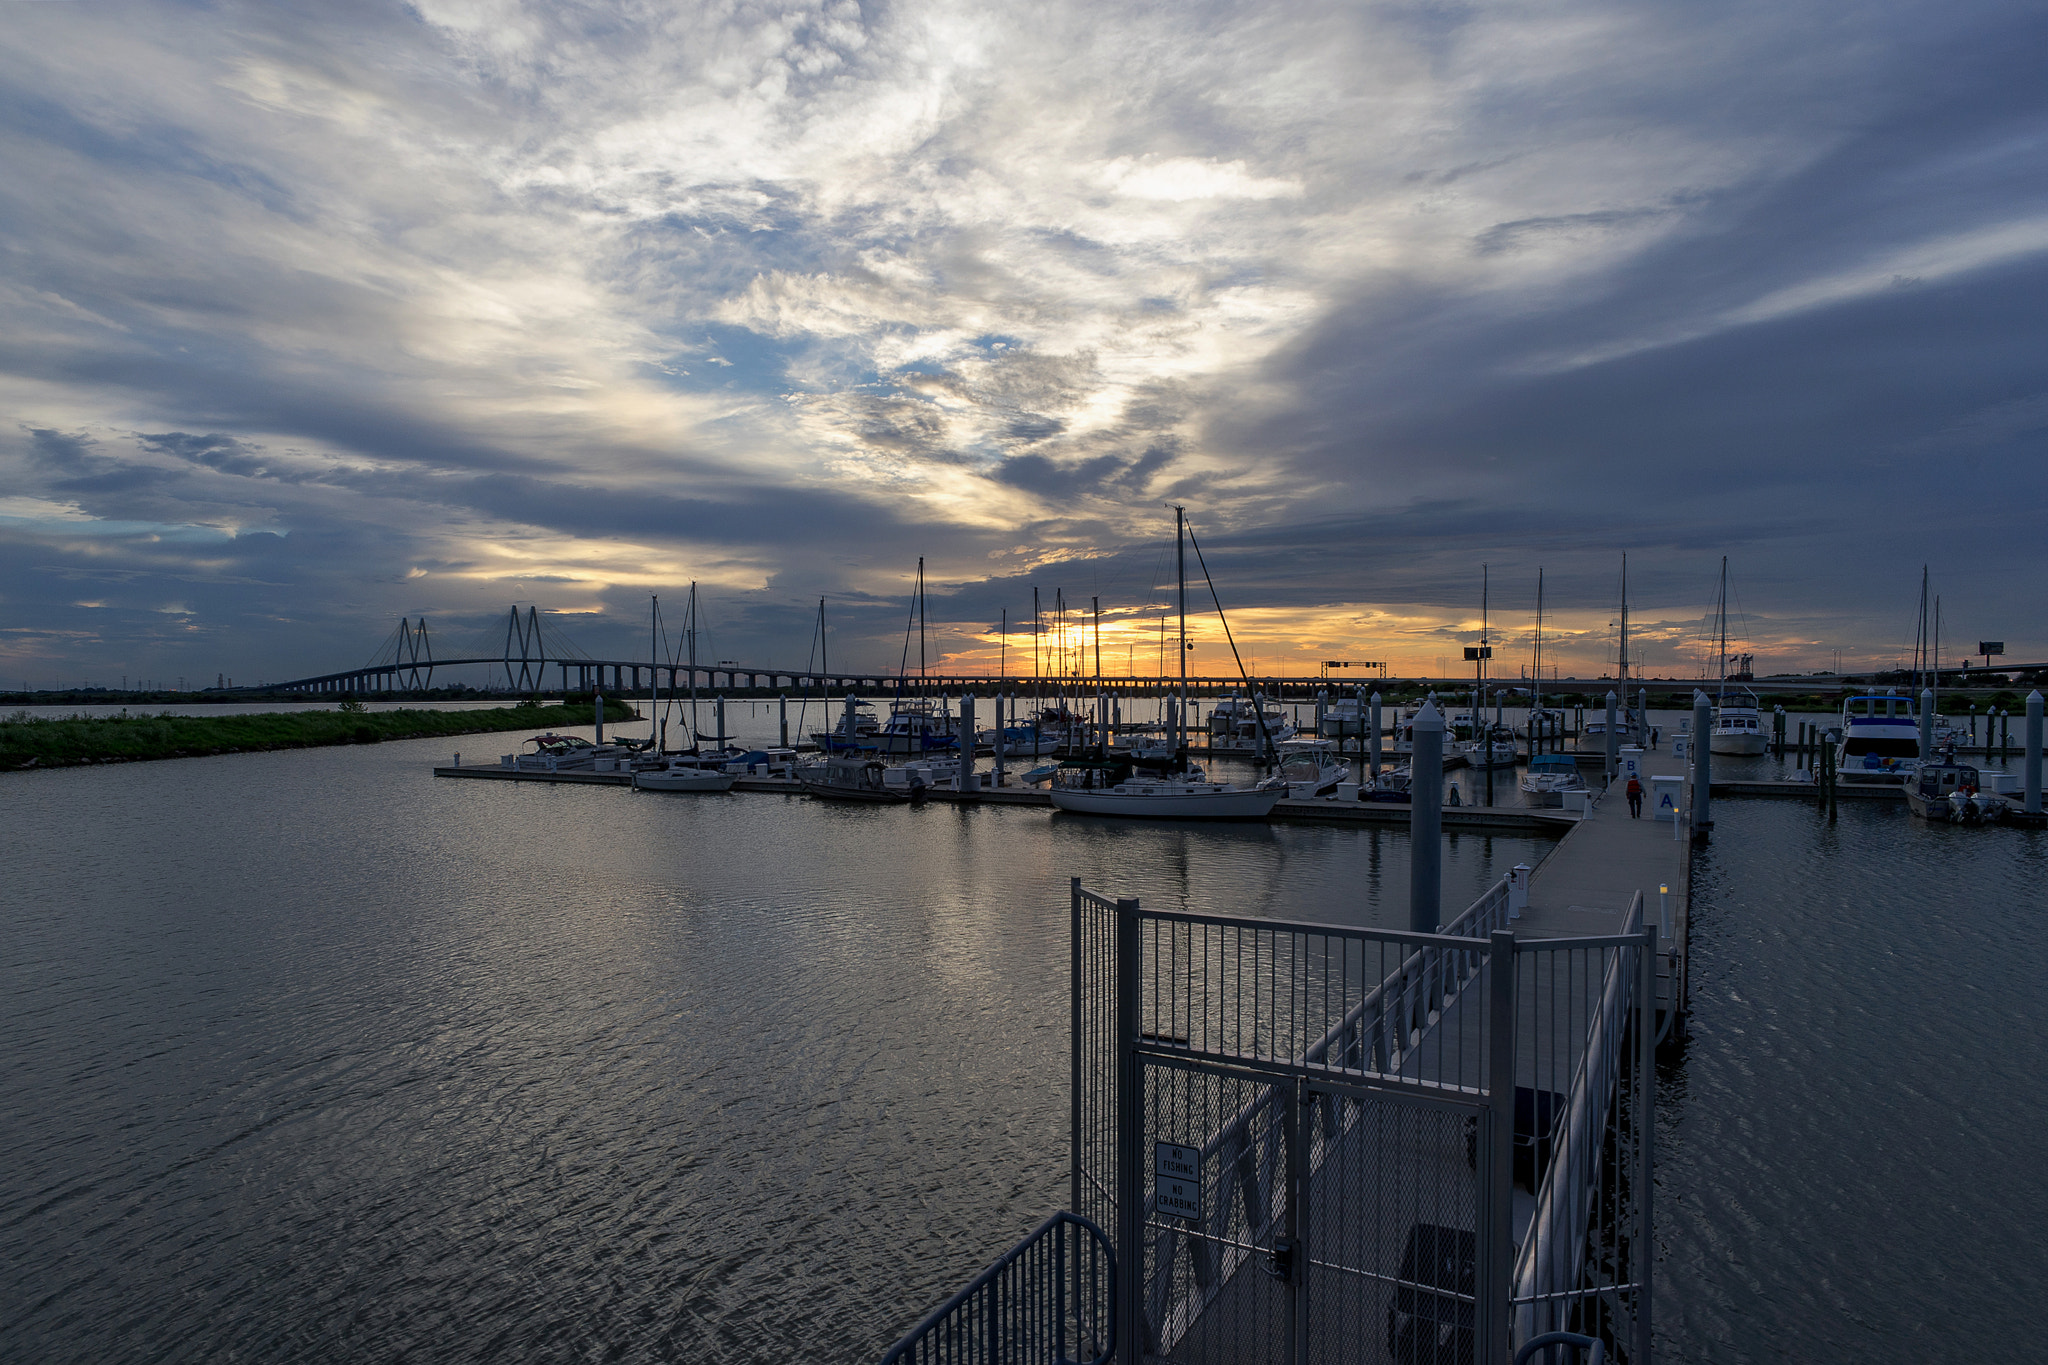 Sony a7 + Sony 20mm F2.8 sample photo. Sunset at fred herman bridge photography